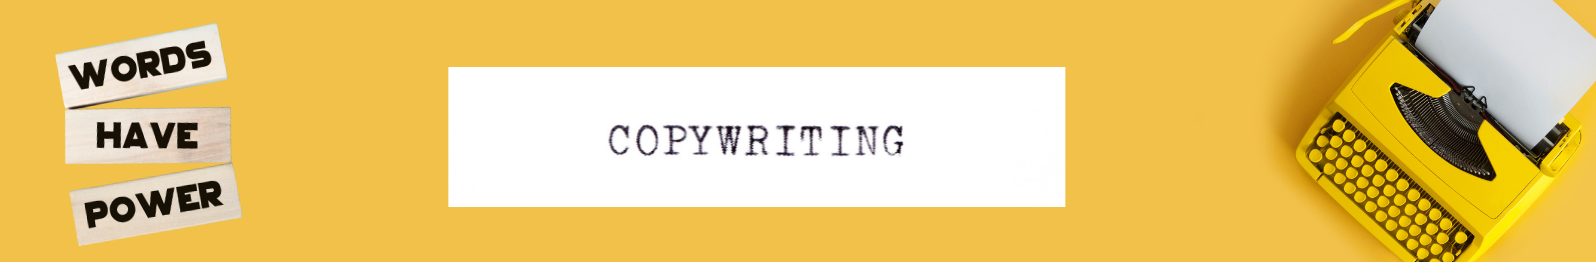 Copywriting - words have POWER